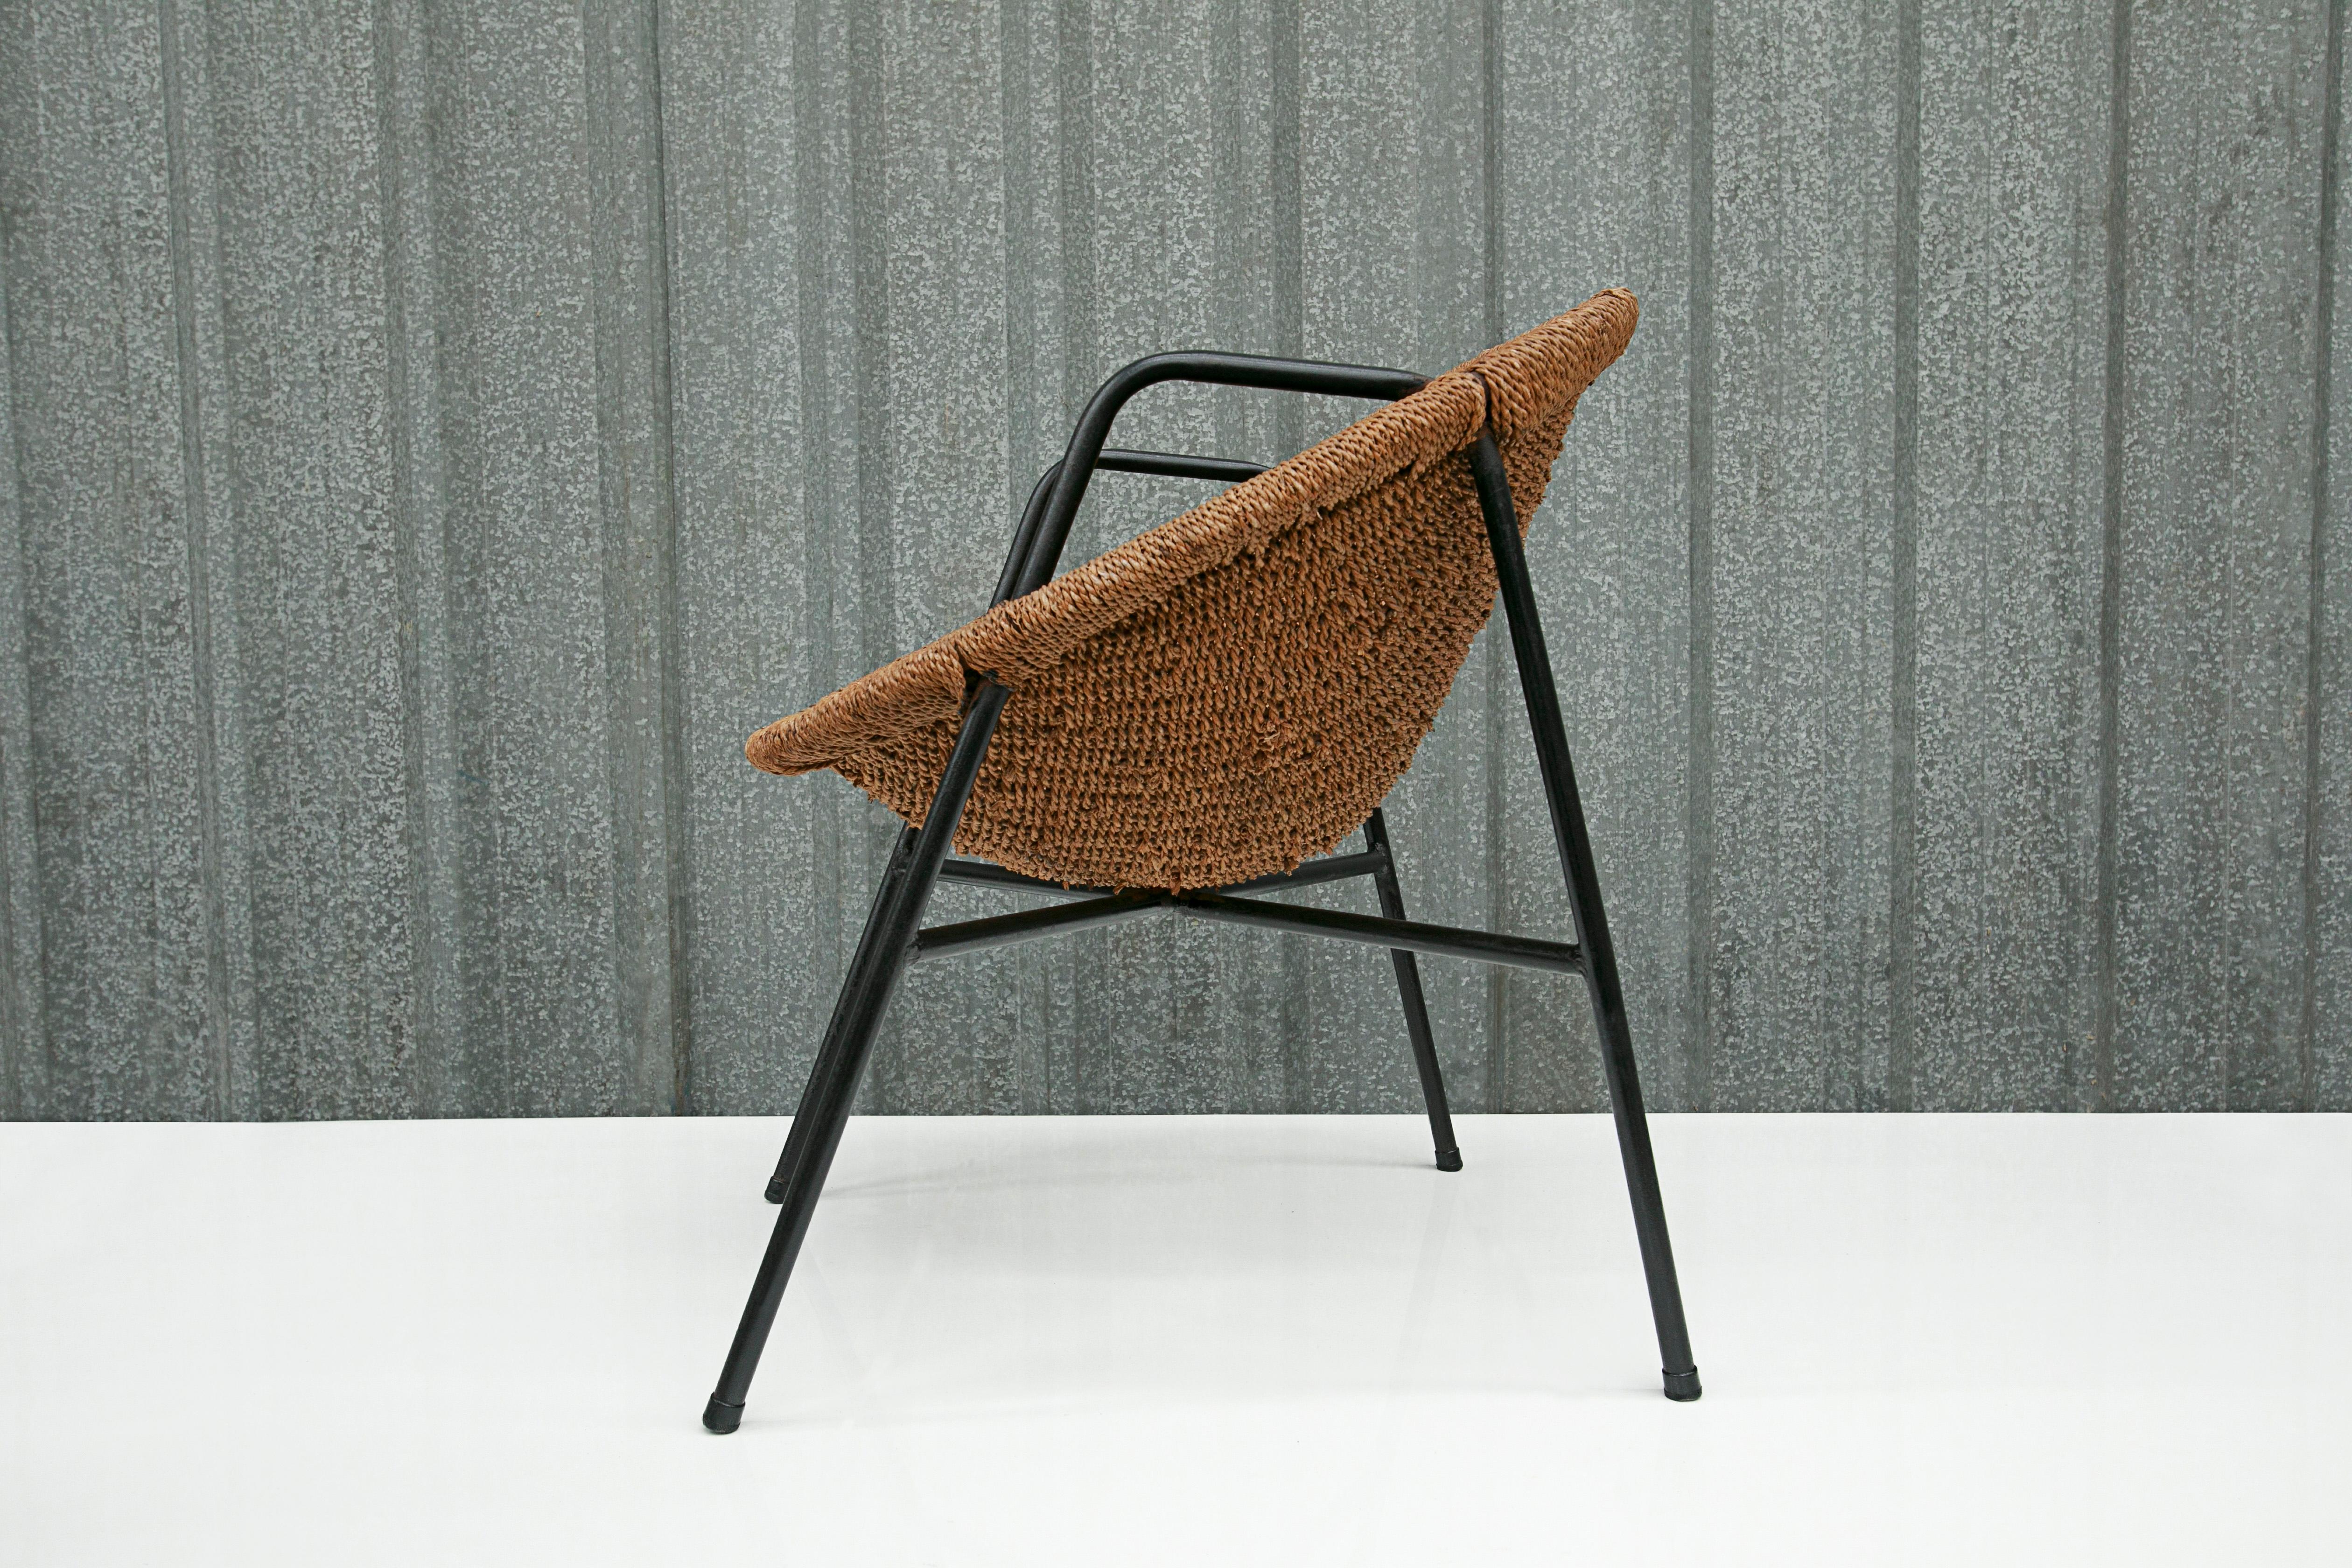 Caning Brazilian Modern Chair in Cane & Iron by Carlo Hauner & Martin Eisler, 1950s For Sale